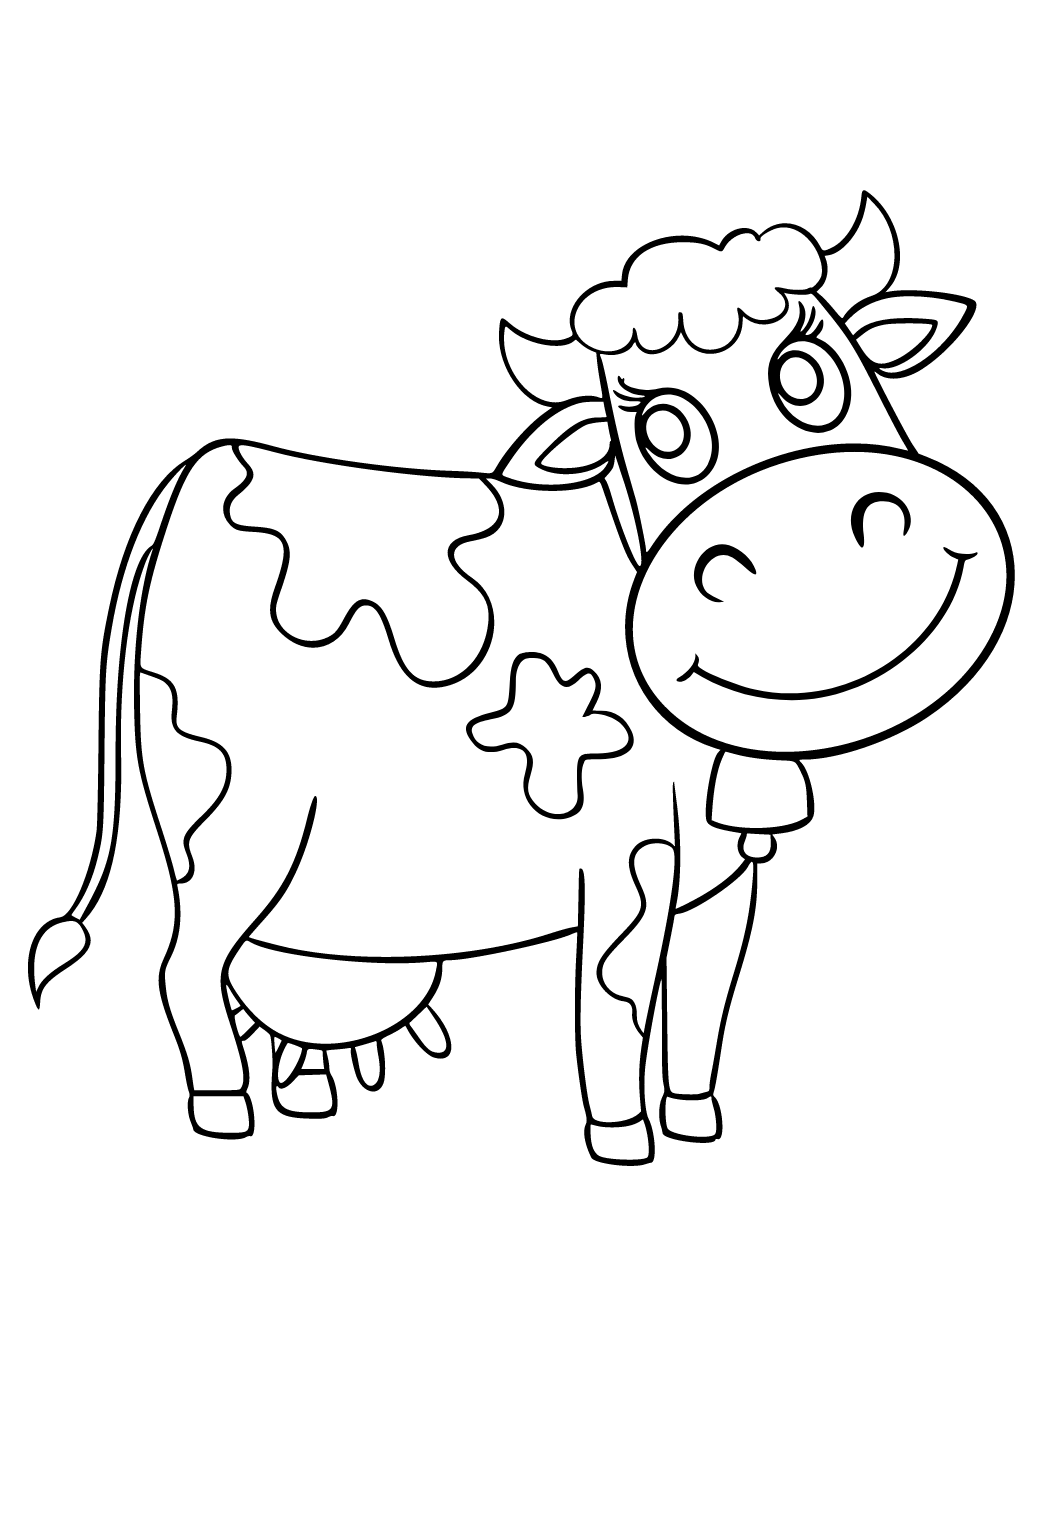 Free Printable Cow Smile Coloring Page for Adults and Kids - Lystok.com